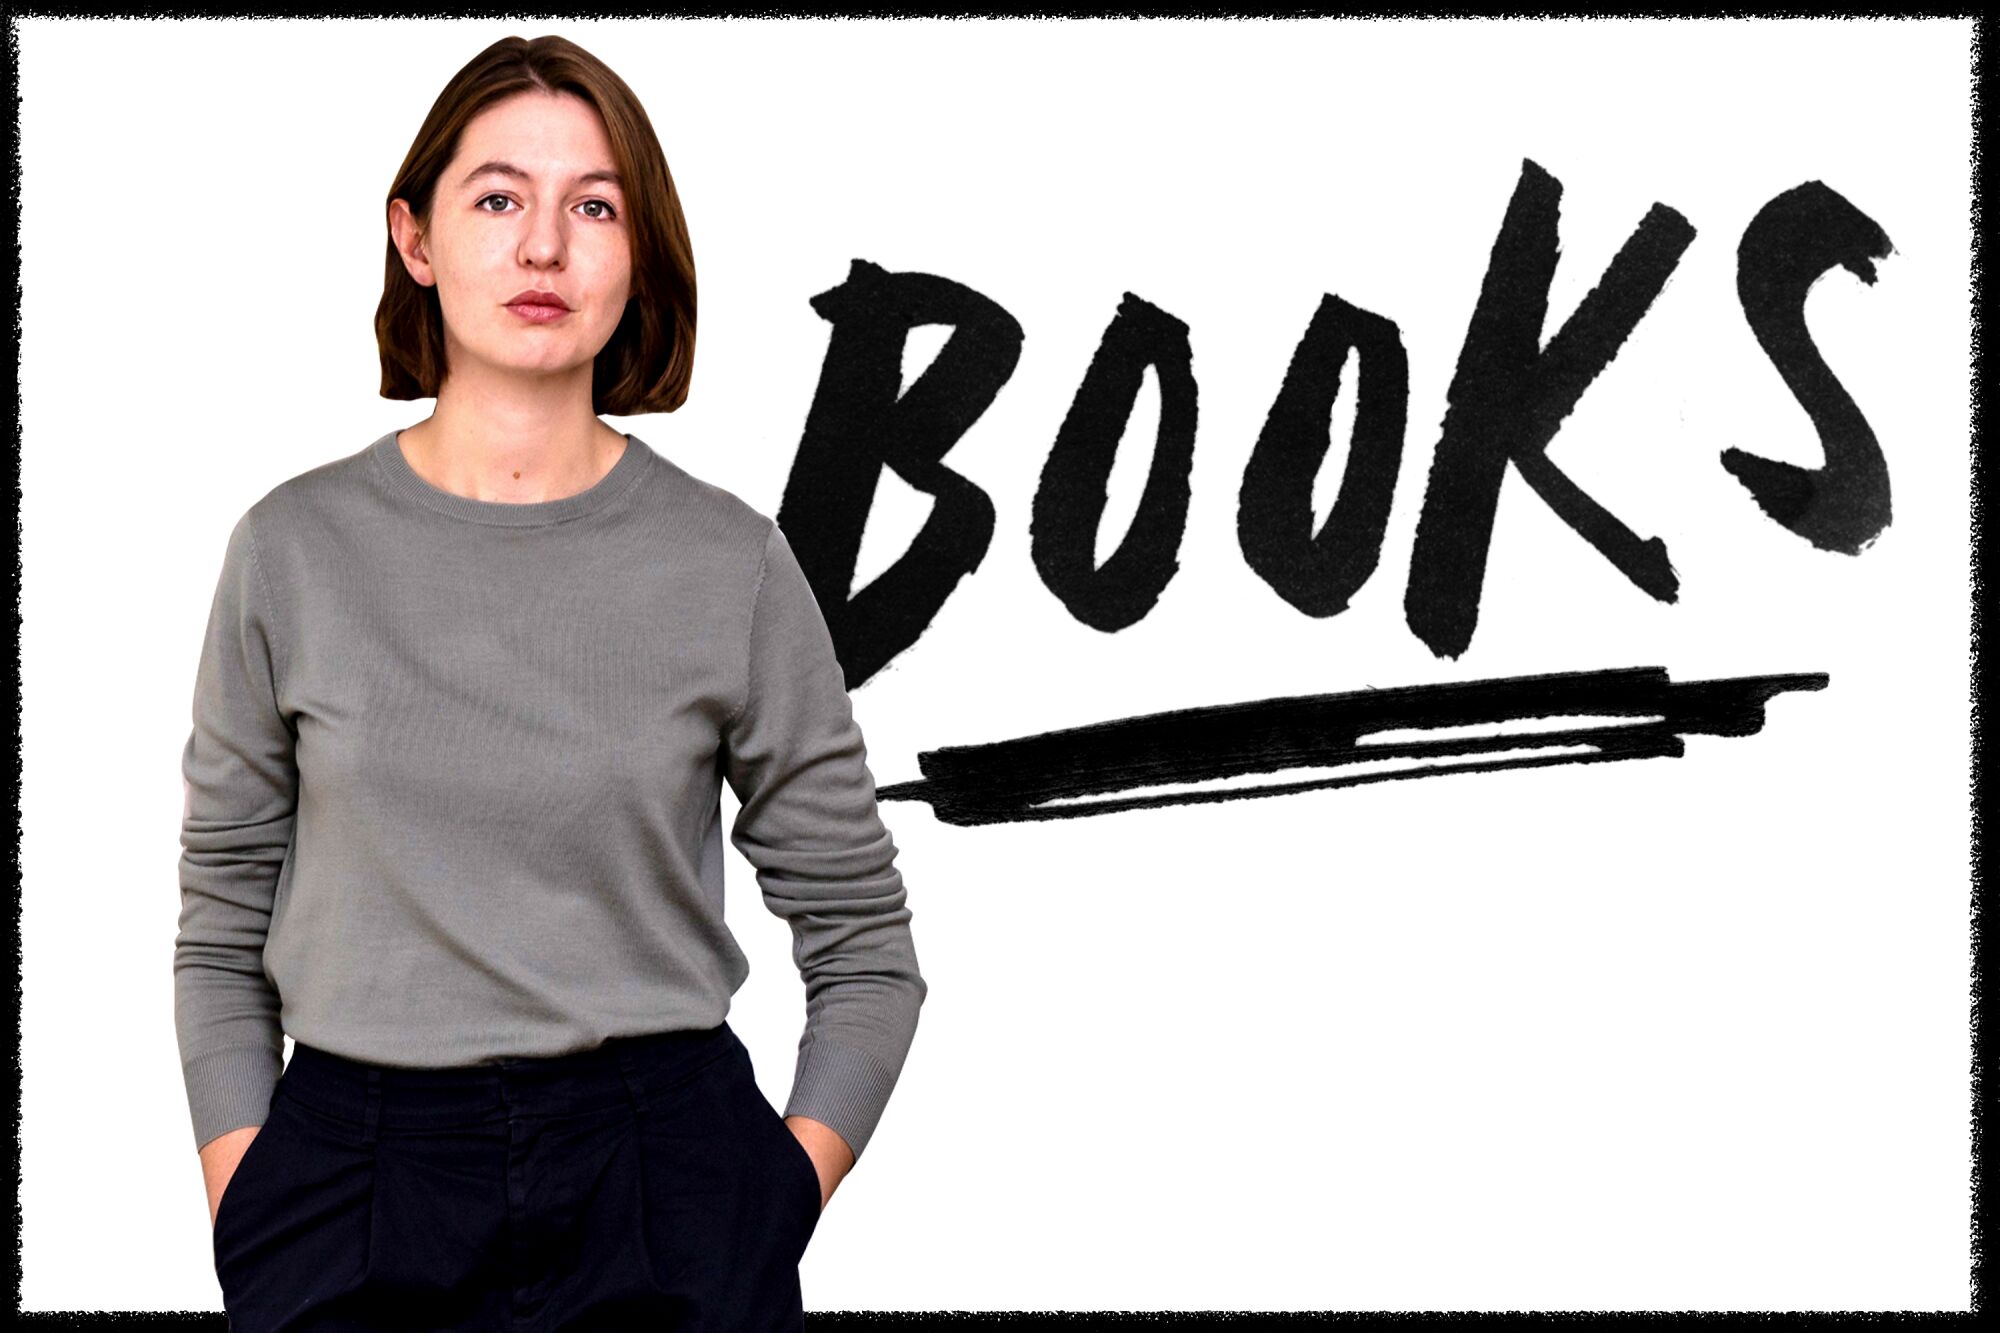 Author Sally Rooney poses in a long-sleeved gray shirt.